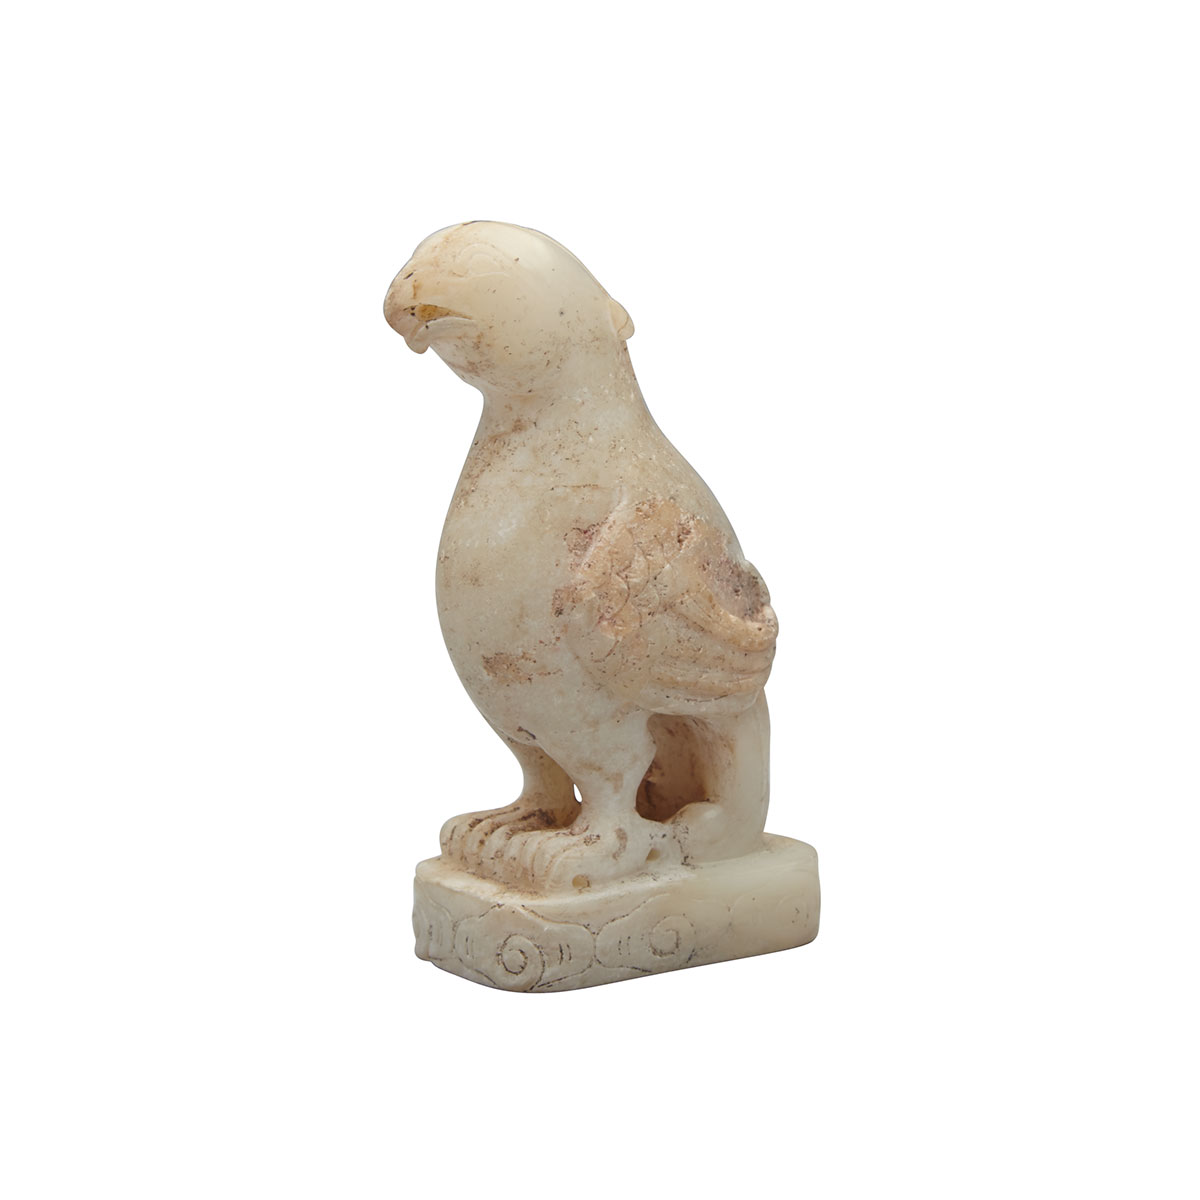 Small White Jade Model of a Parrot